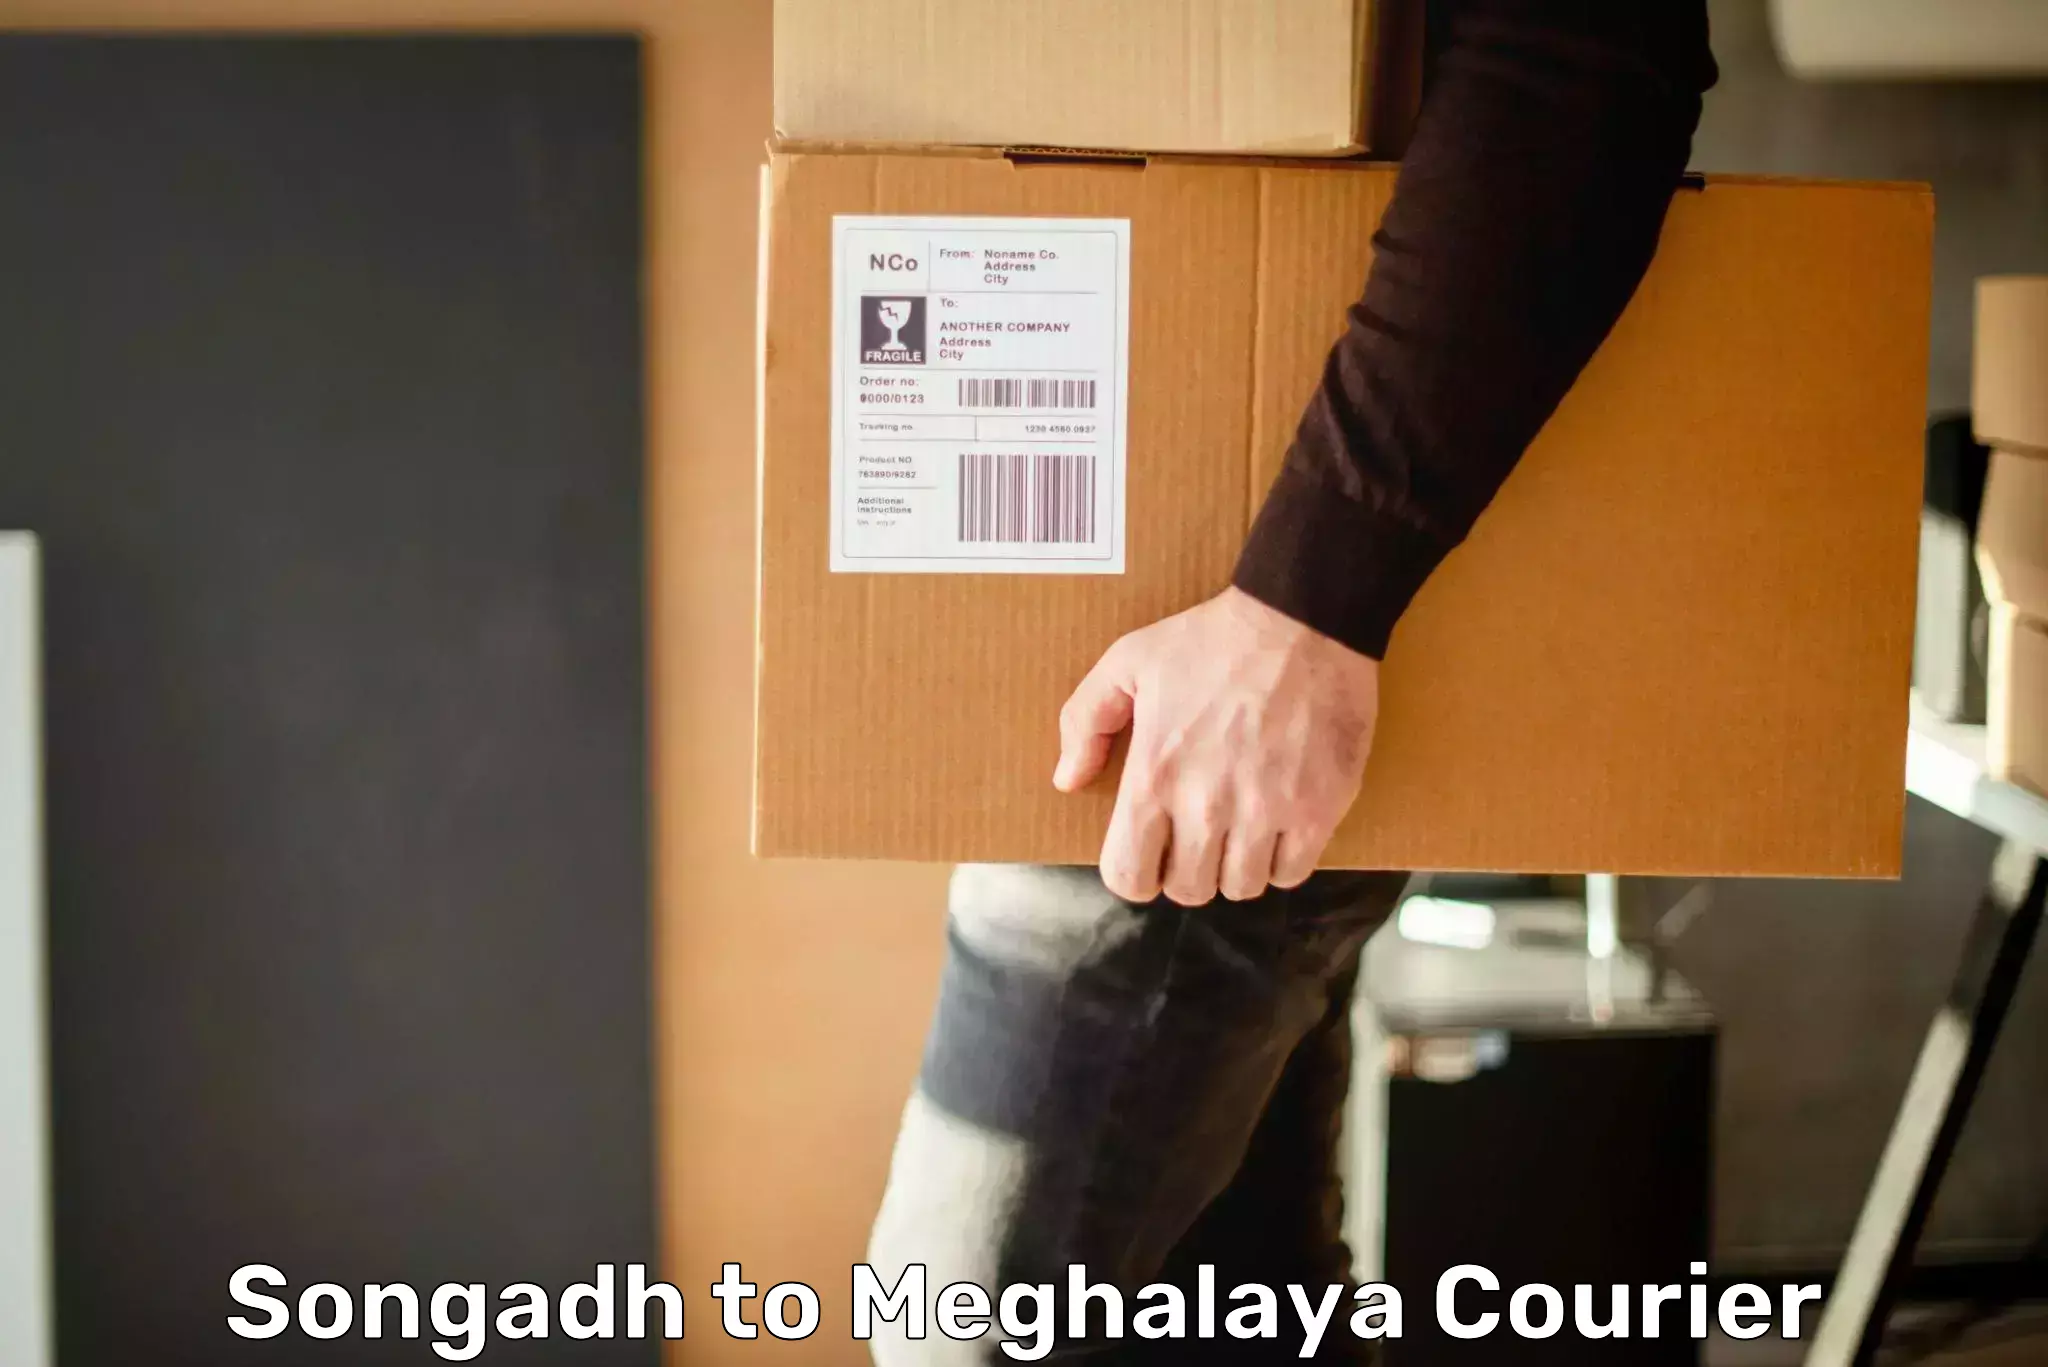 Next-day delivery options Songadh to Meghalaya